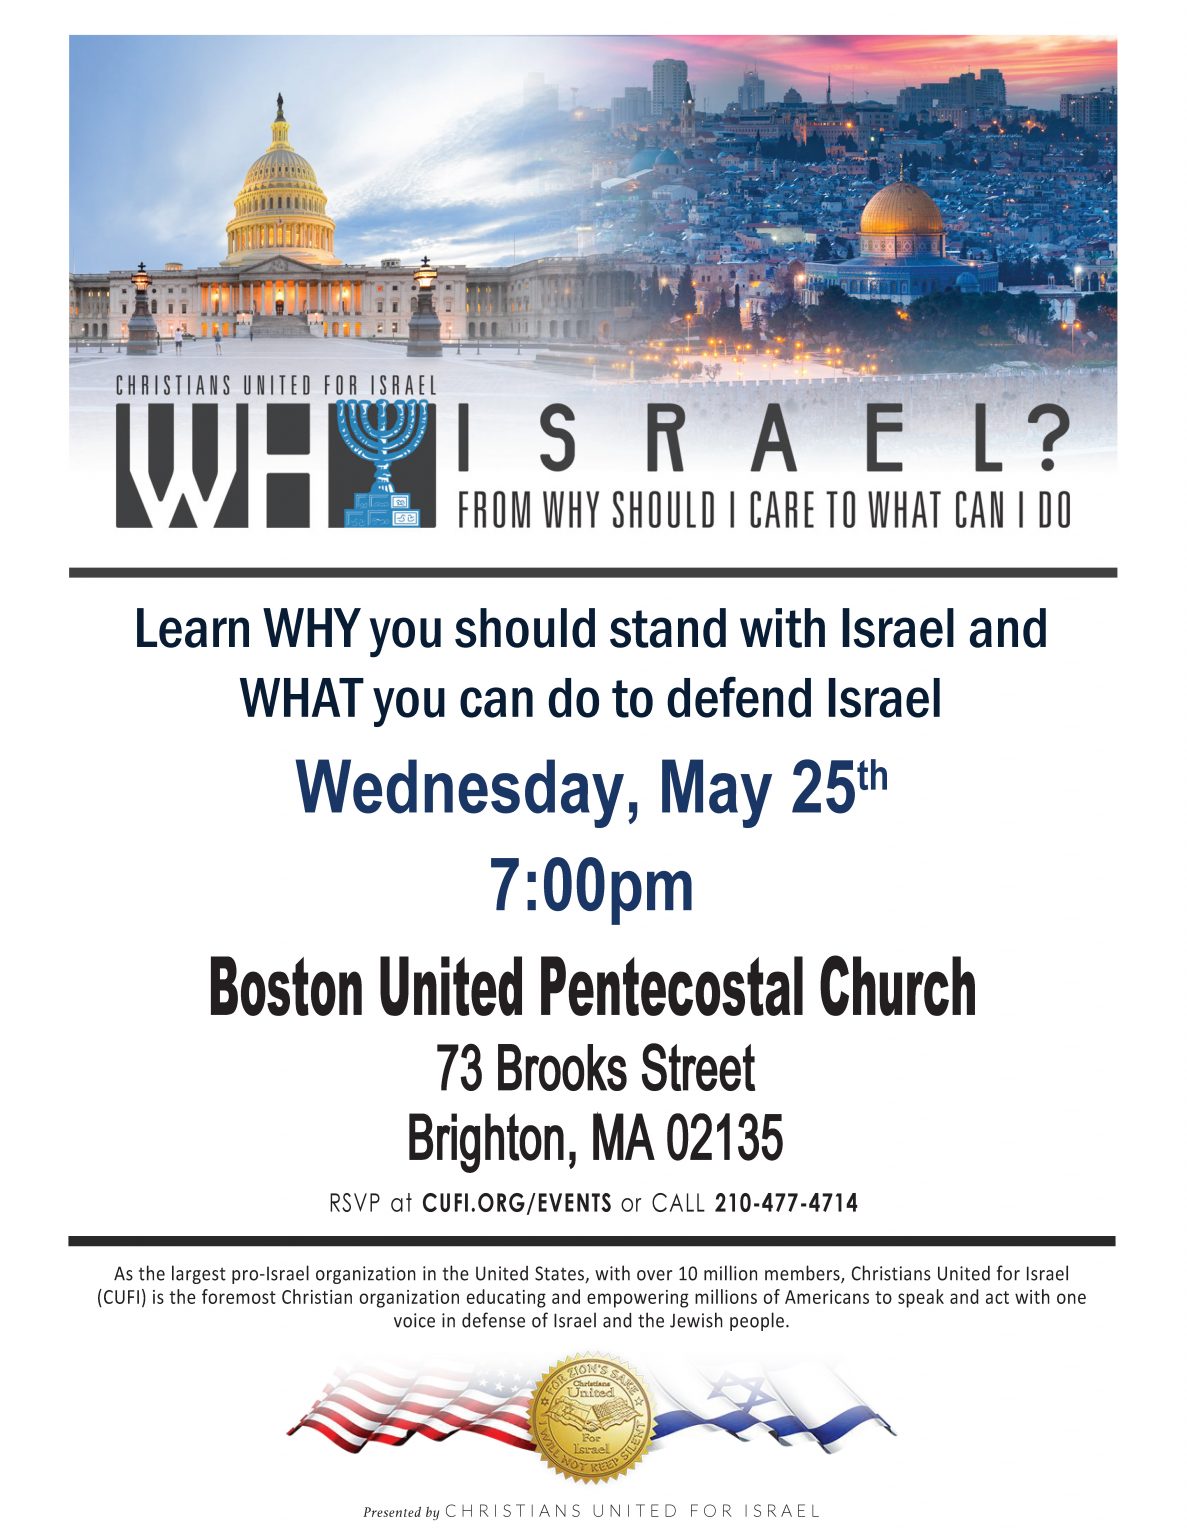 Flyer for a pro-Zionist talk by Christians United for Israel, hosted by Boston United Pentecostal Church